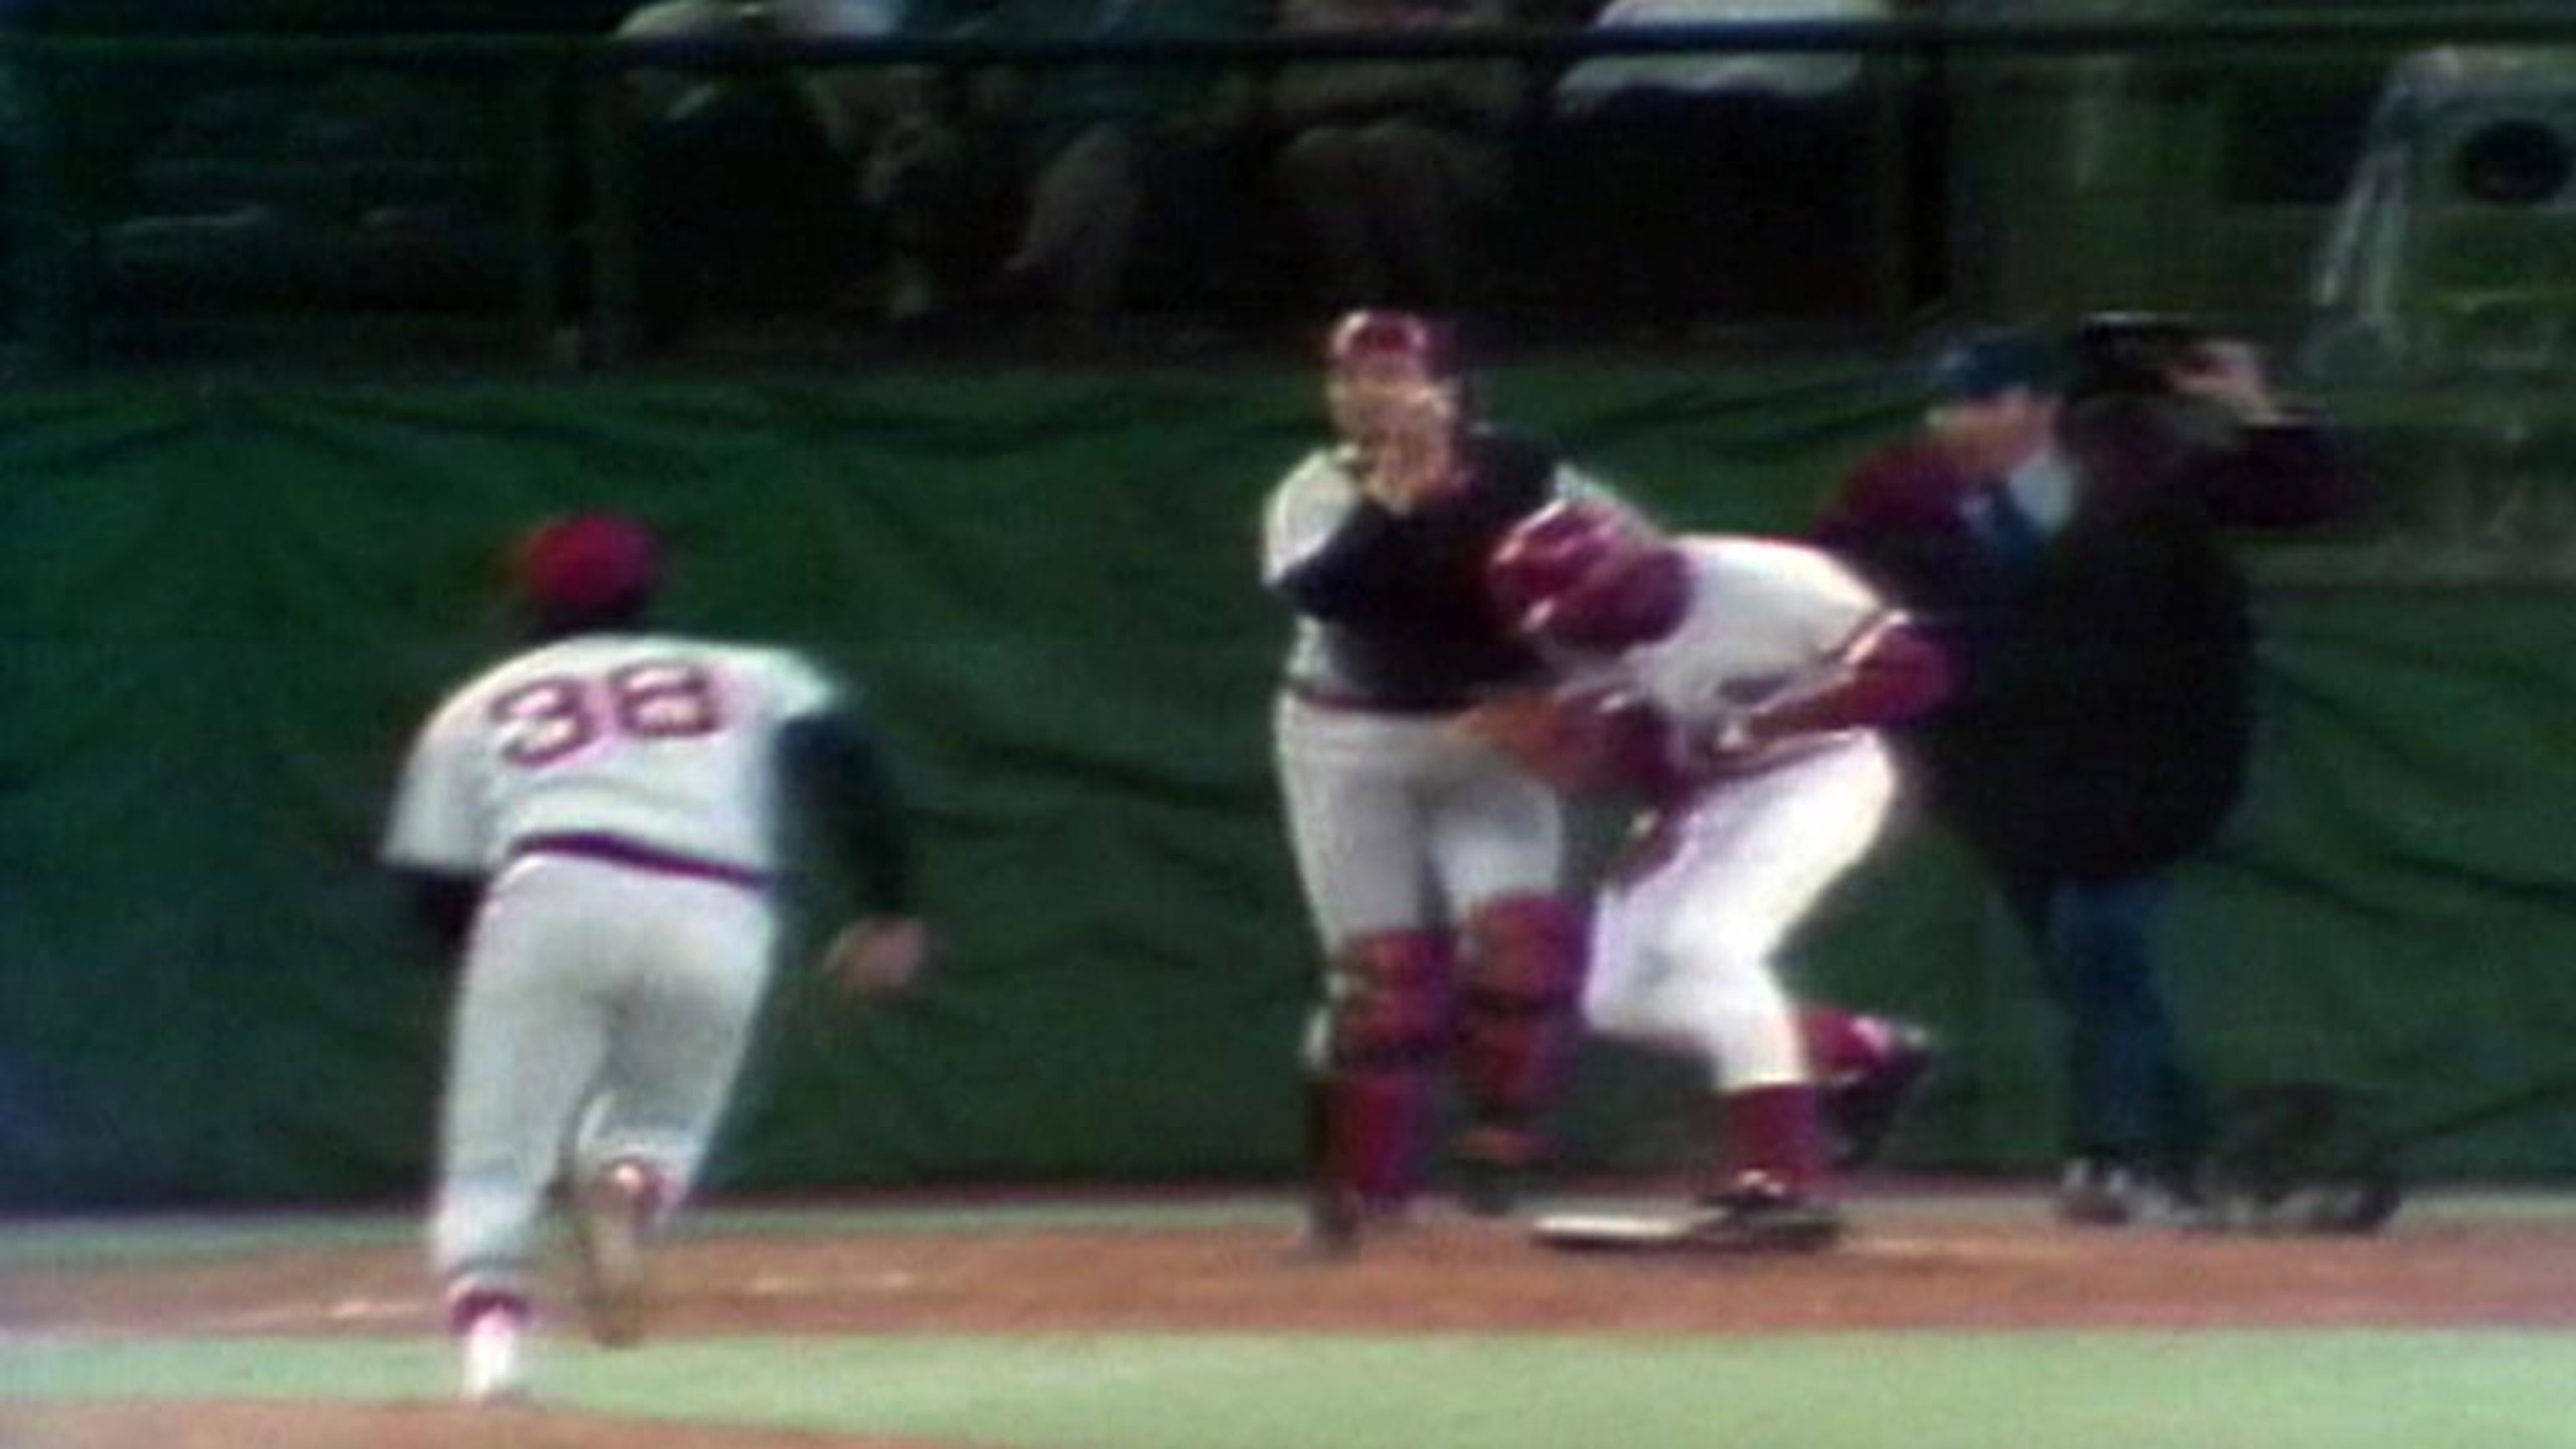 Carlton Fisk walks off vs the Red's Game 6 1975 World Series 